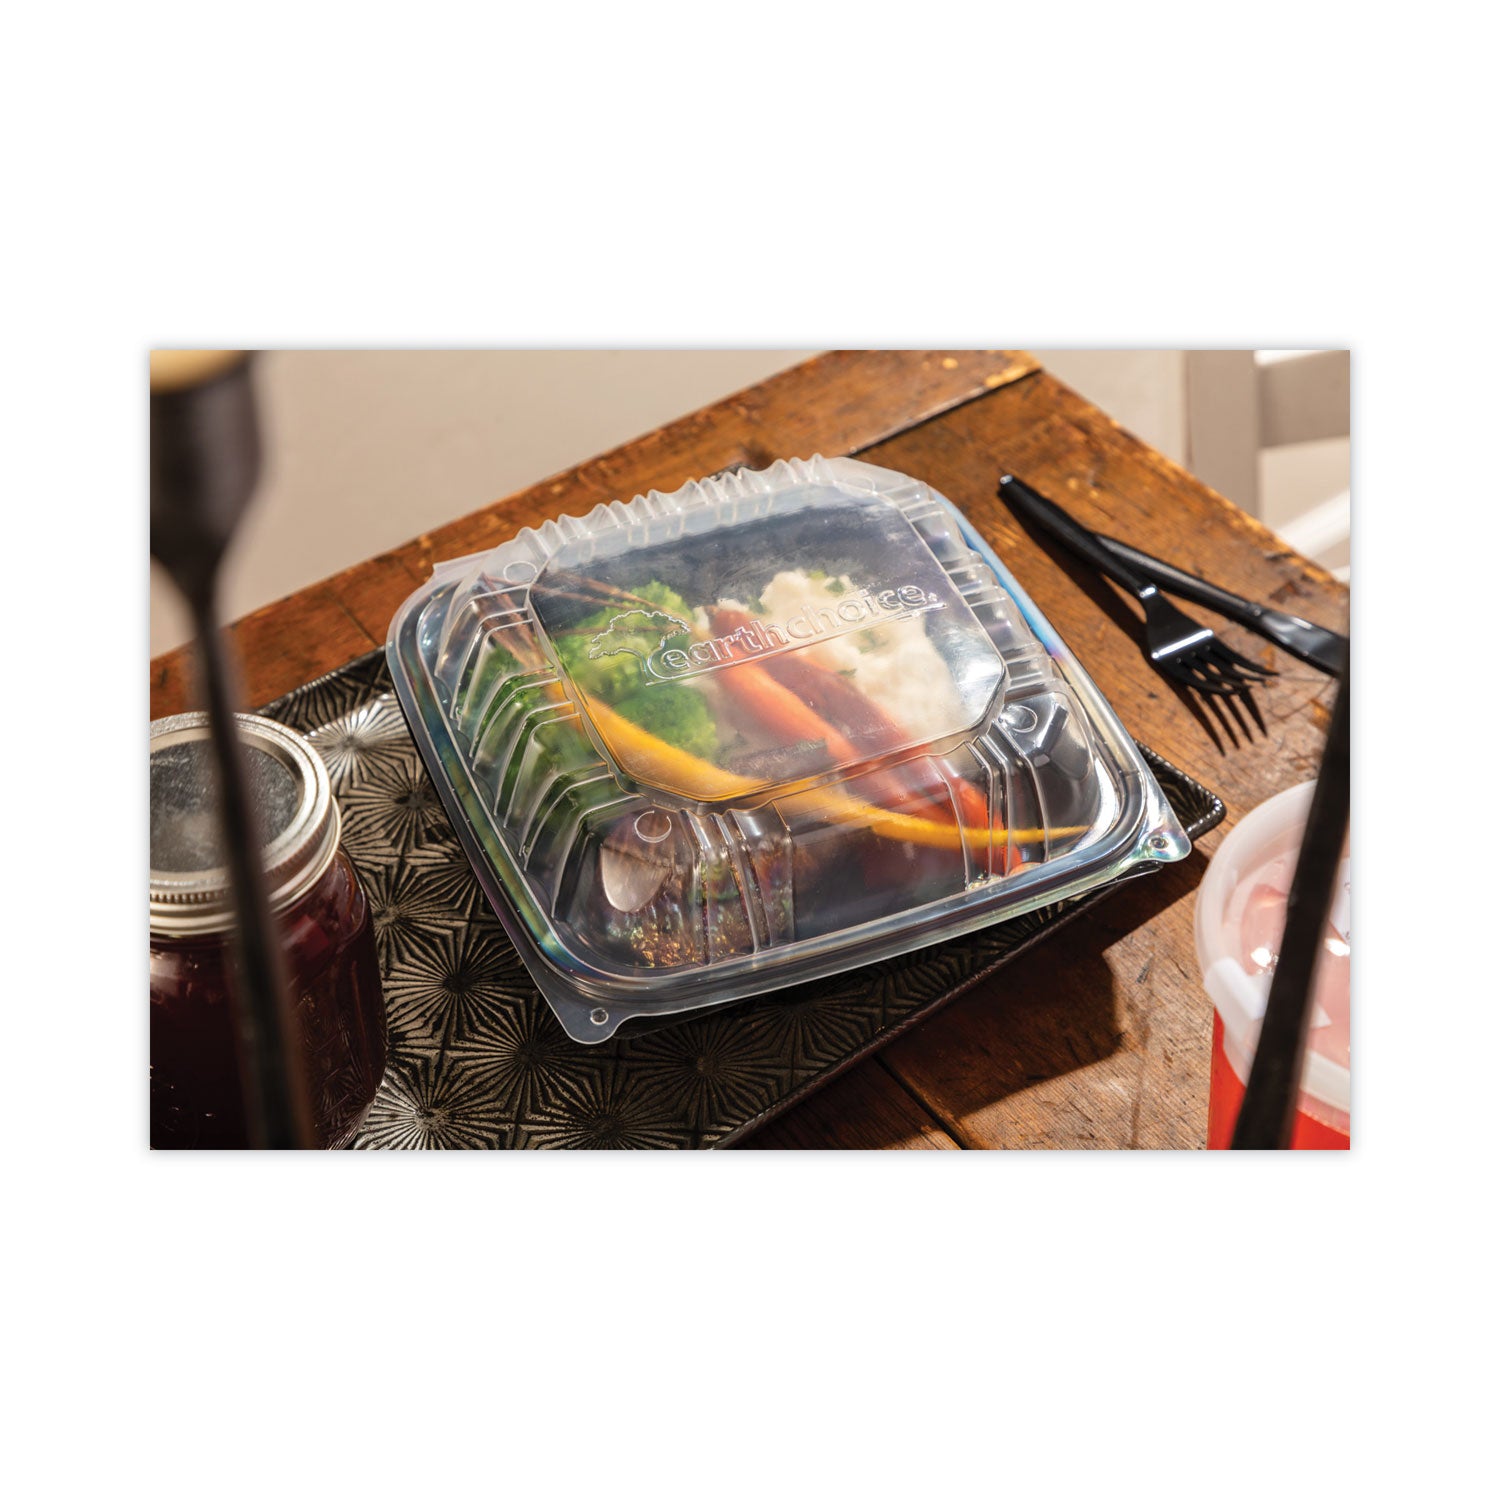 earthchoice-vented-dual-color-microwavable-hinged-lid-container-1-compartment-66oz-105x95x3-black-clear-plastic-132-ct_pctdc109100b000 - 7